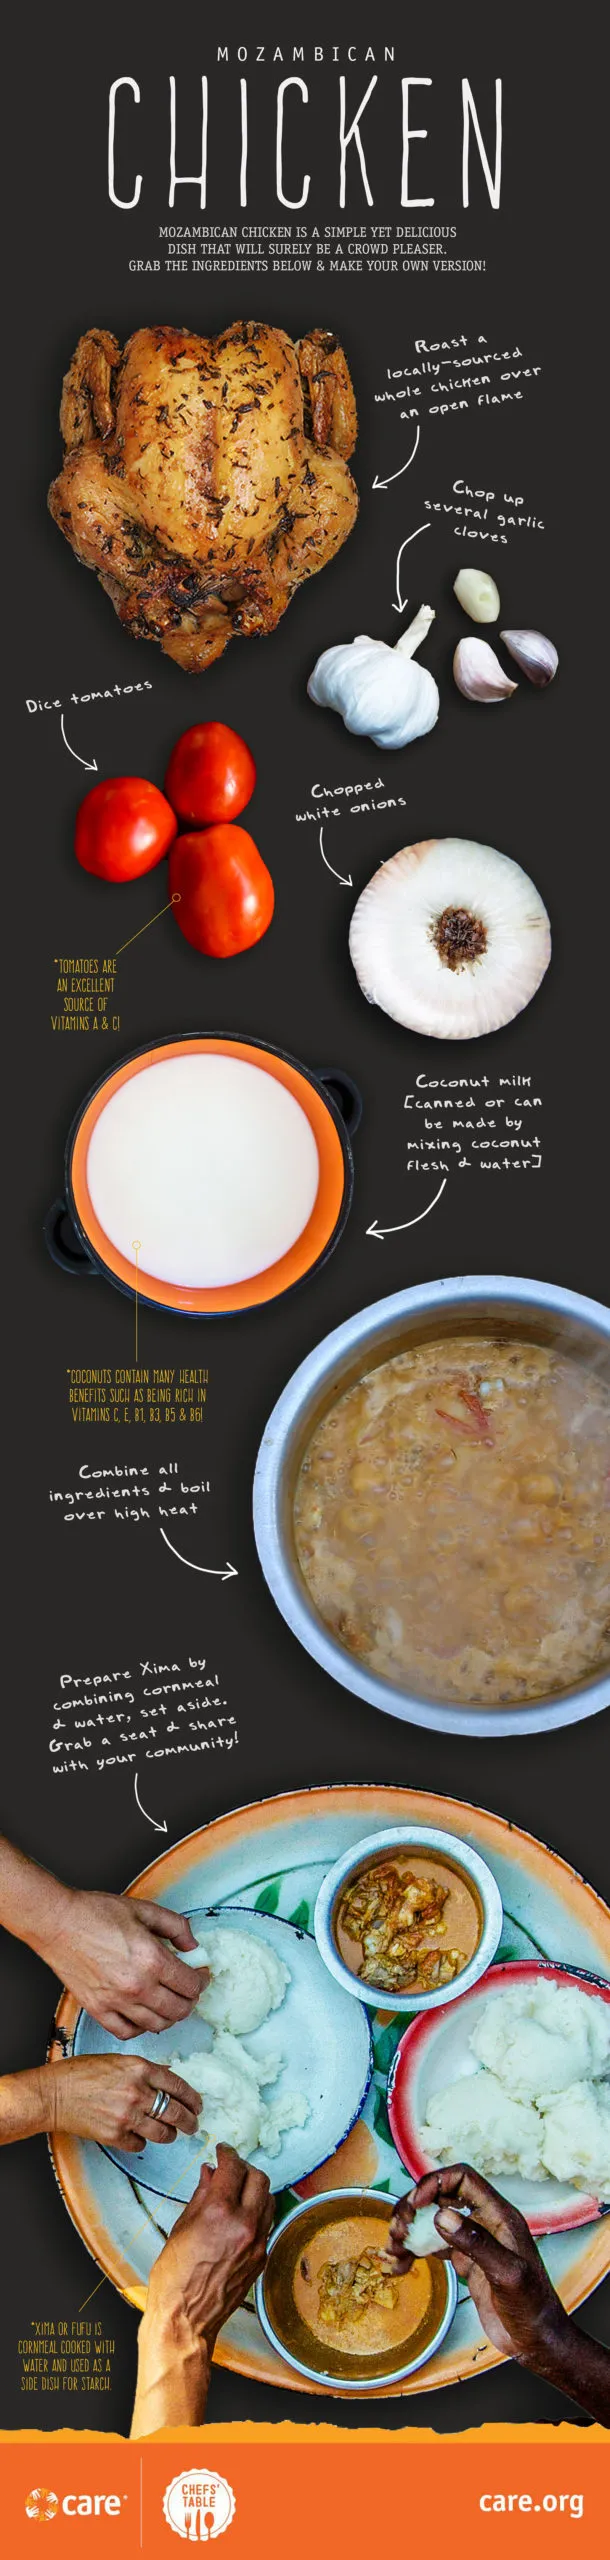 A graphic featuring ingredients and instructions to make Mozambican chicken.